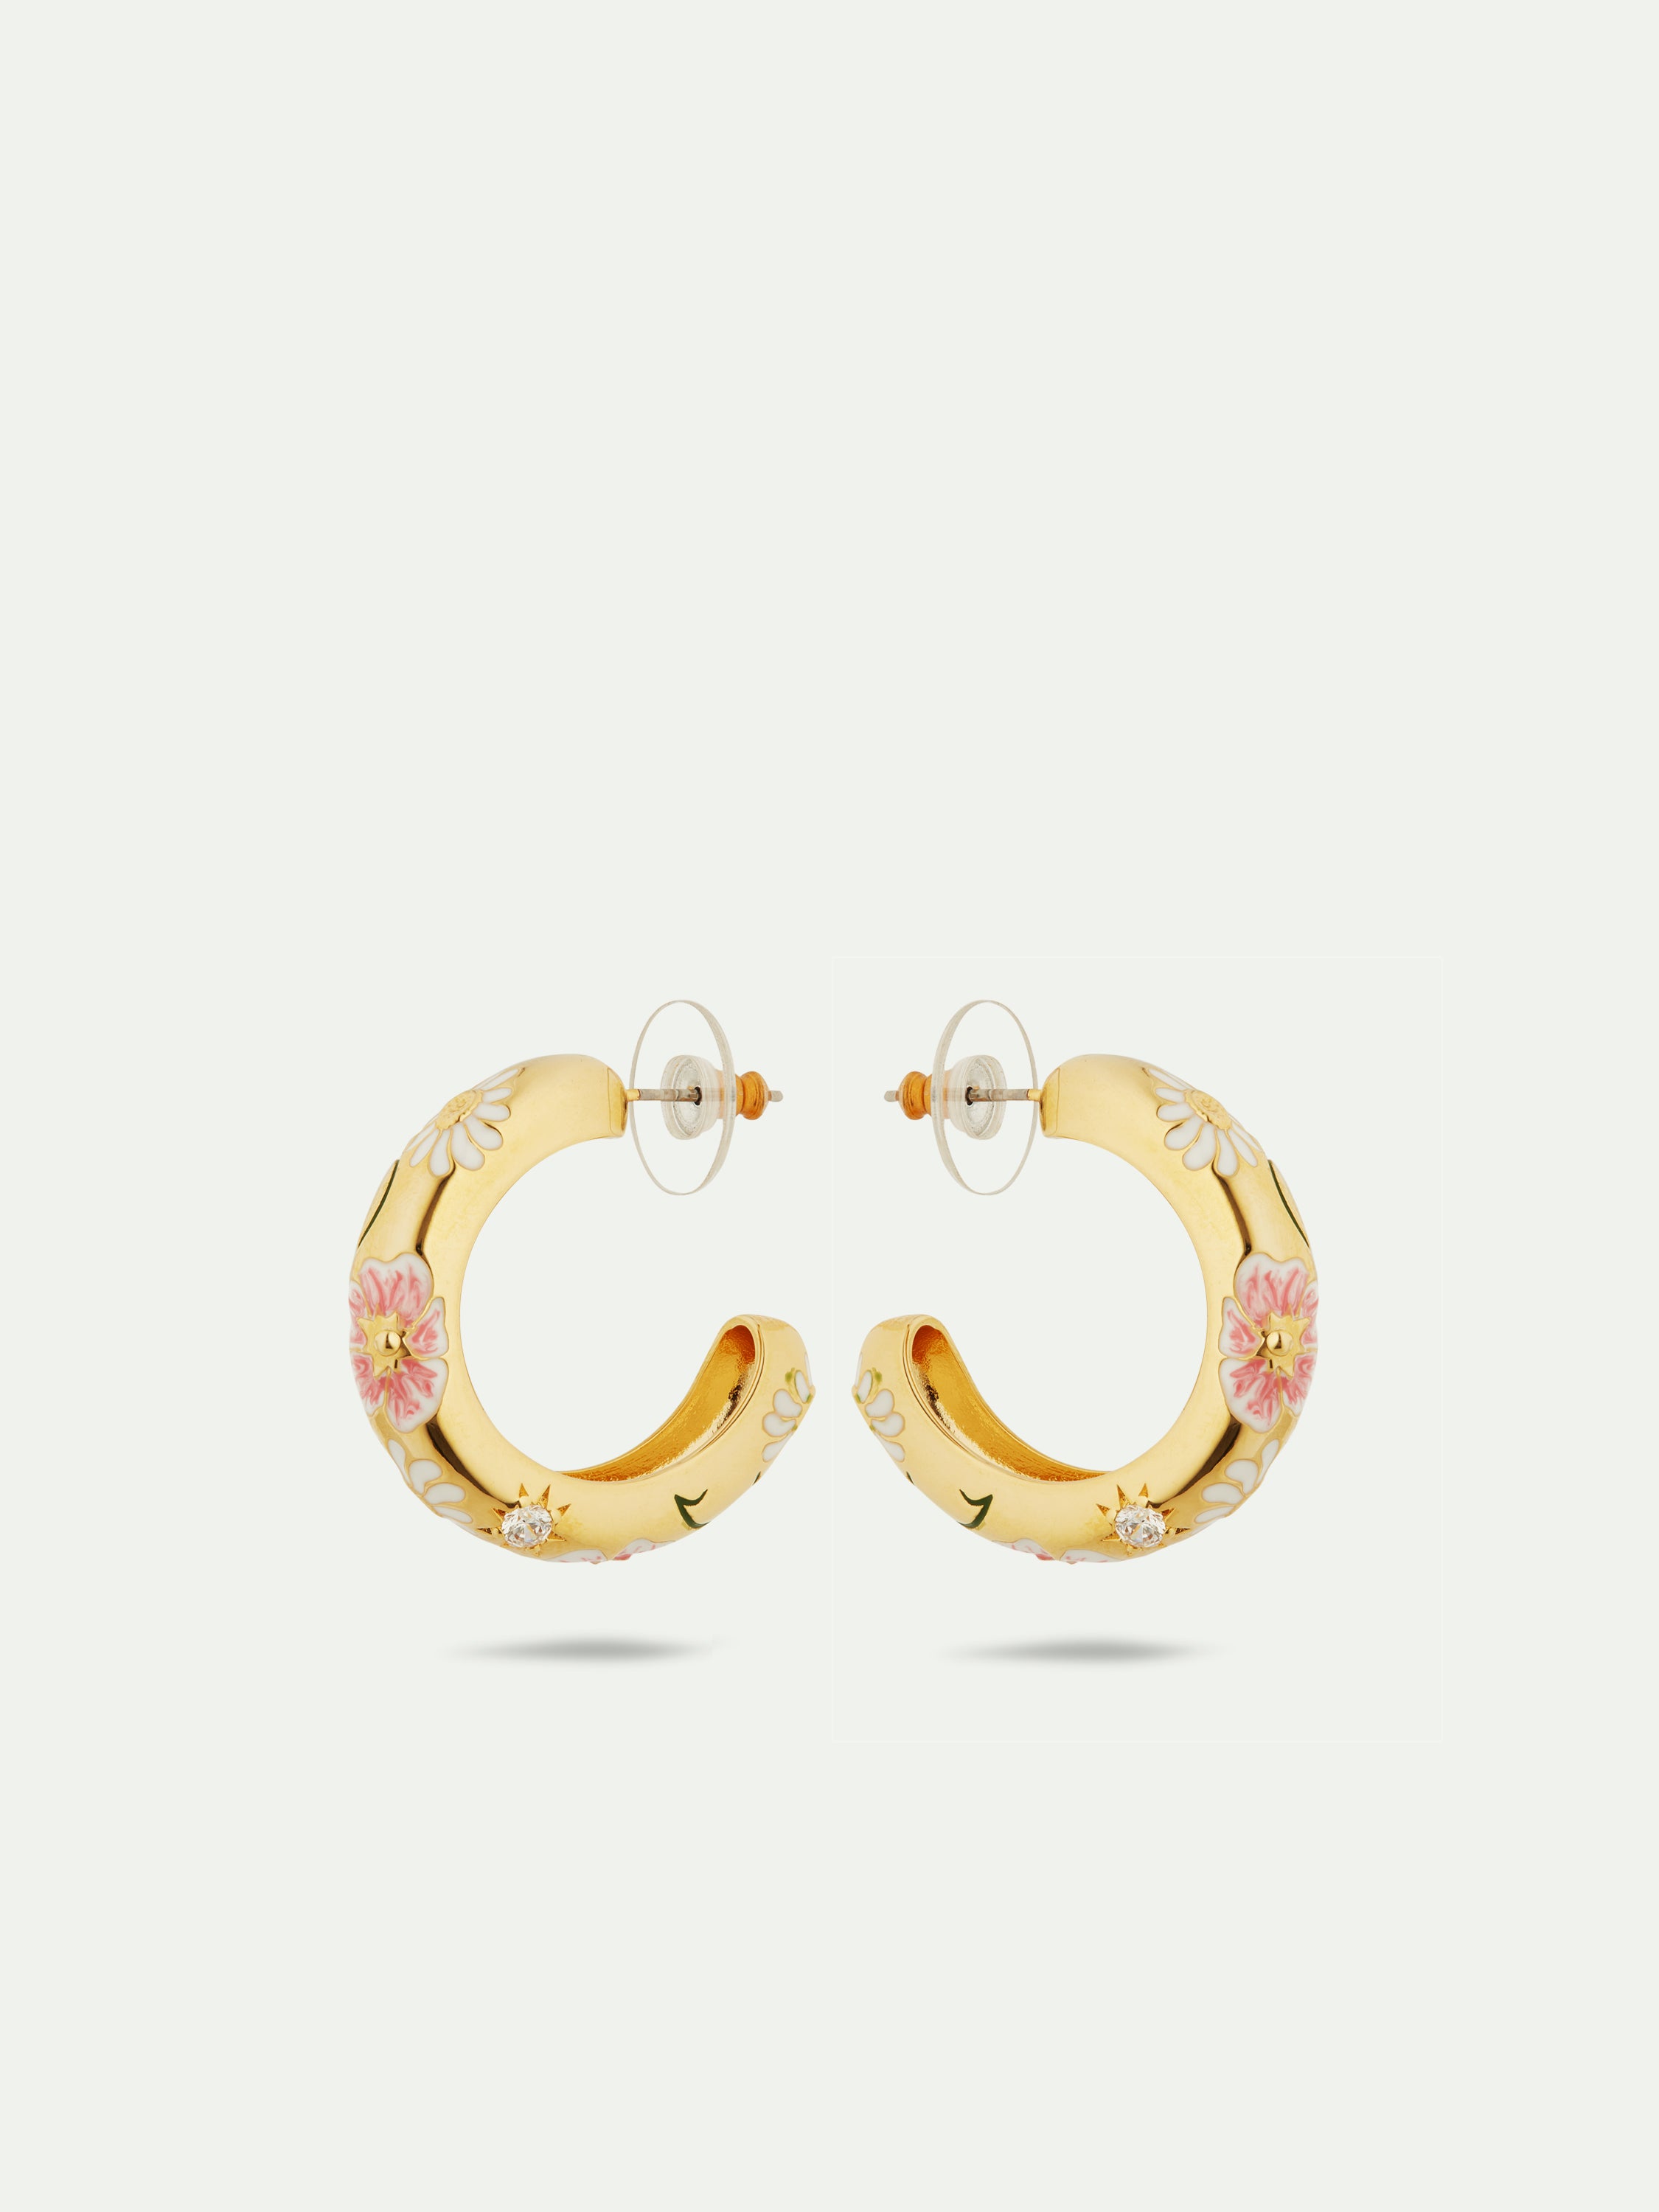 Daisy and pansy flower hoop earrings